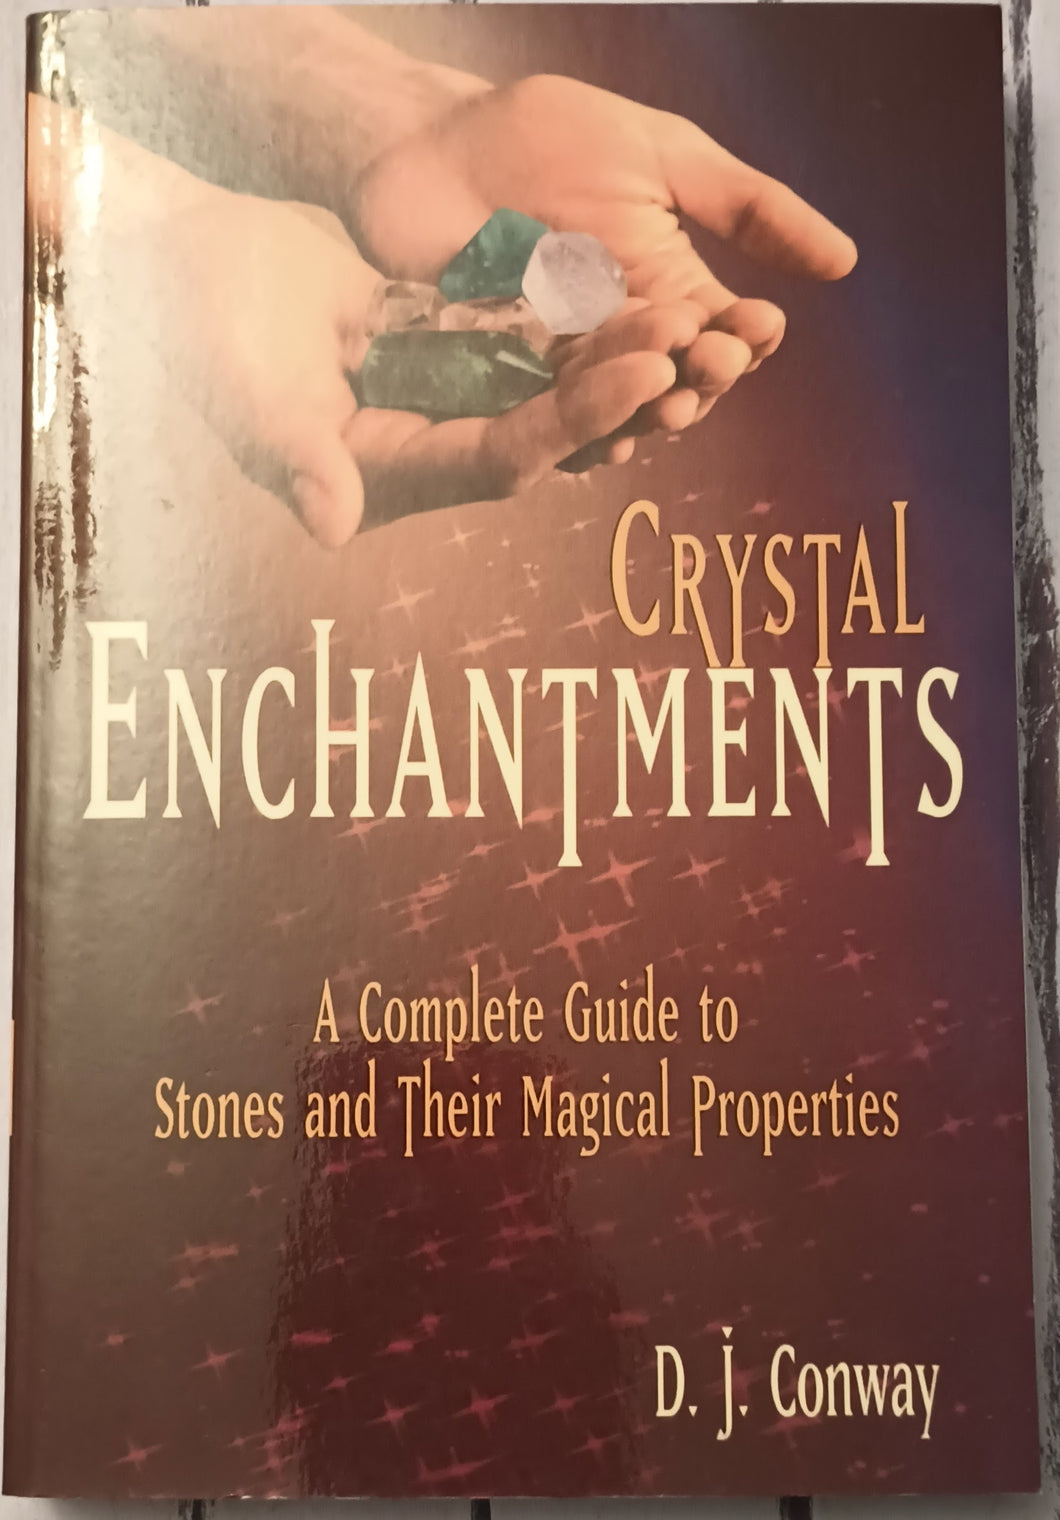 Crystal Enchantments: A Complete Guide to Stones and Their Magical Properties